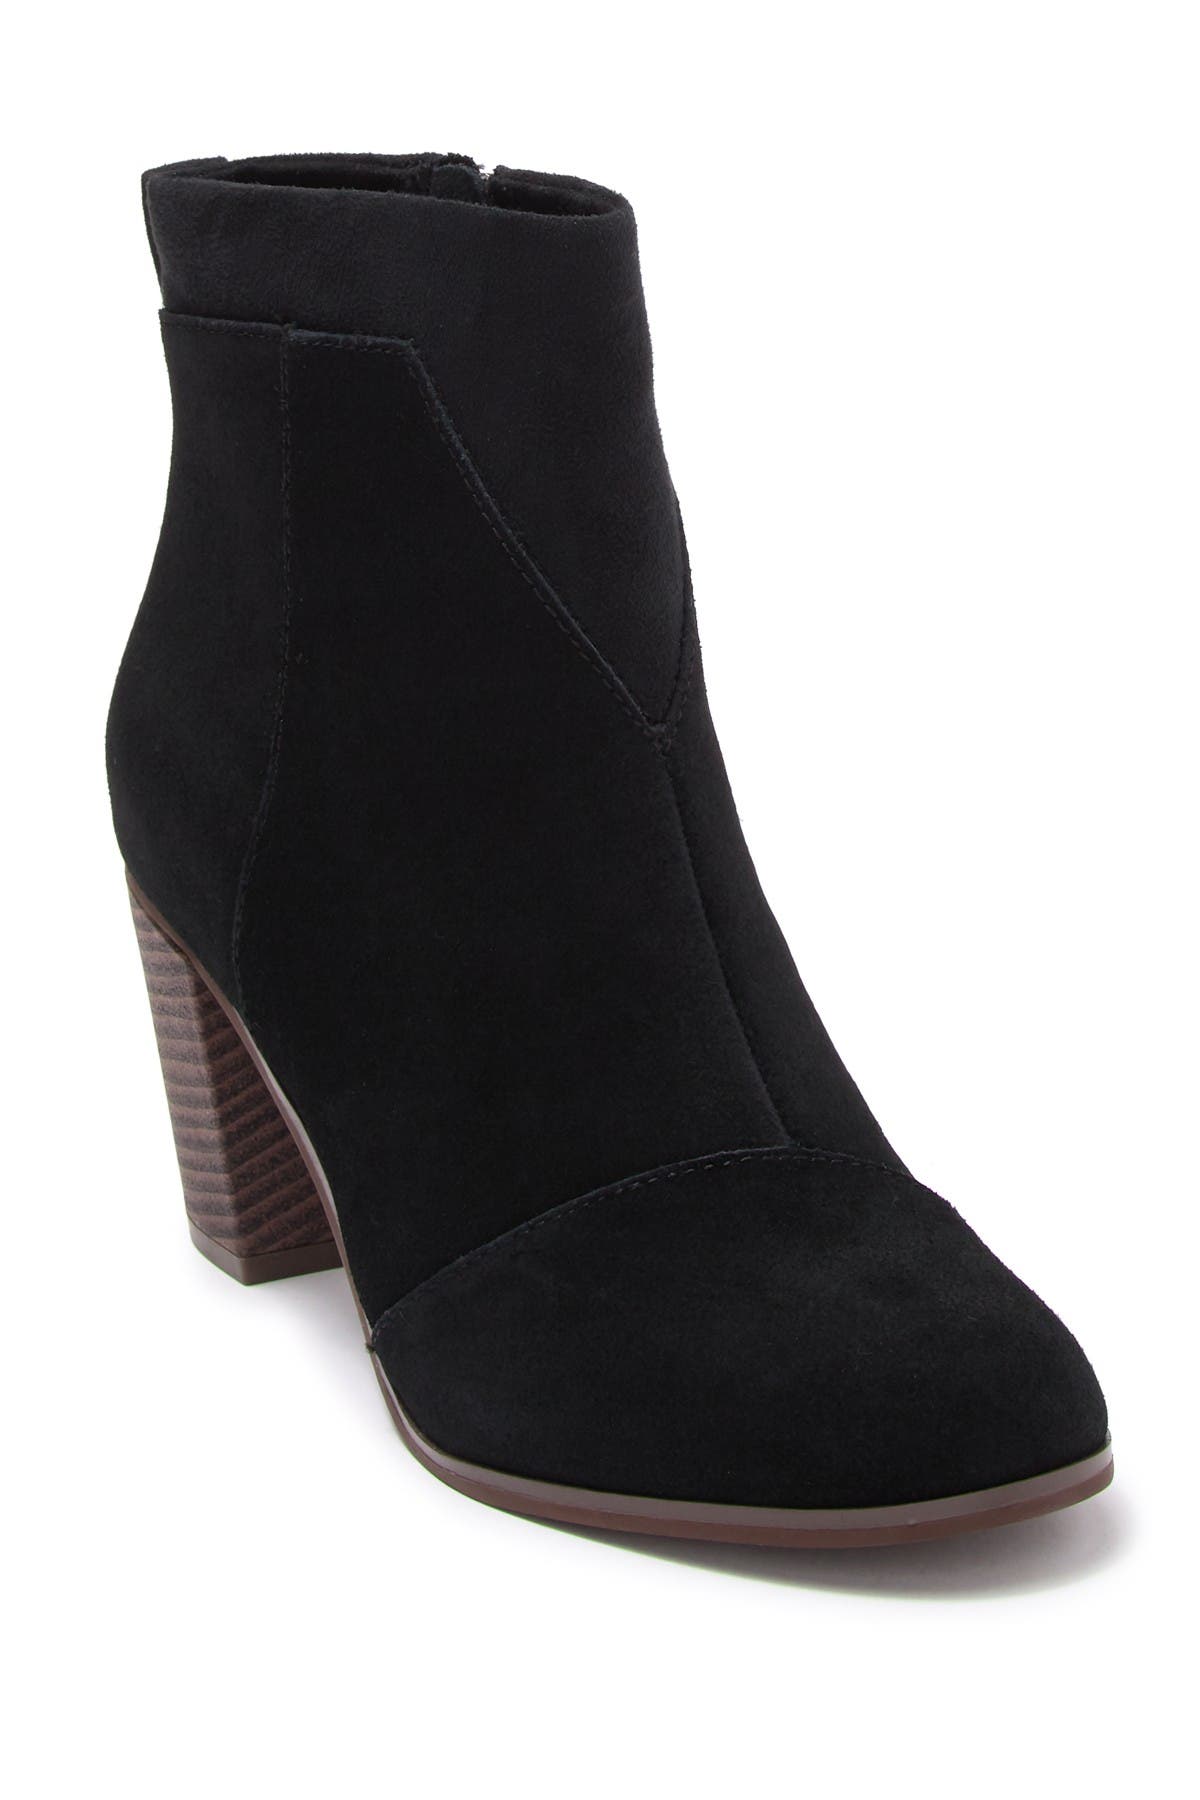 TOMS | Lunata Suede Ankle Boot 